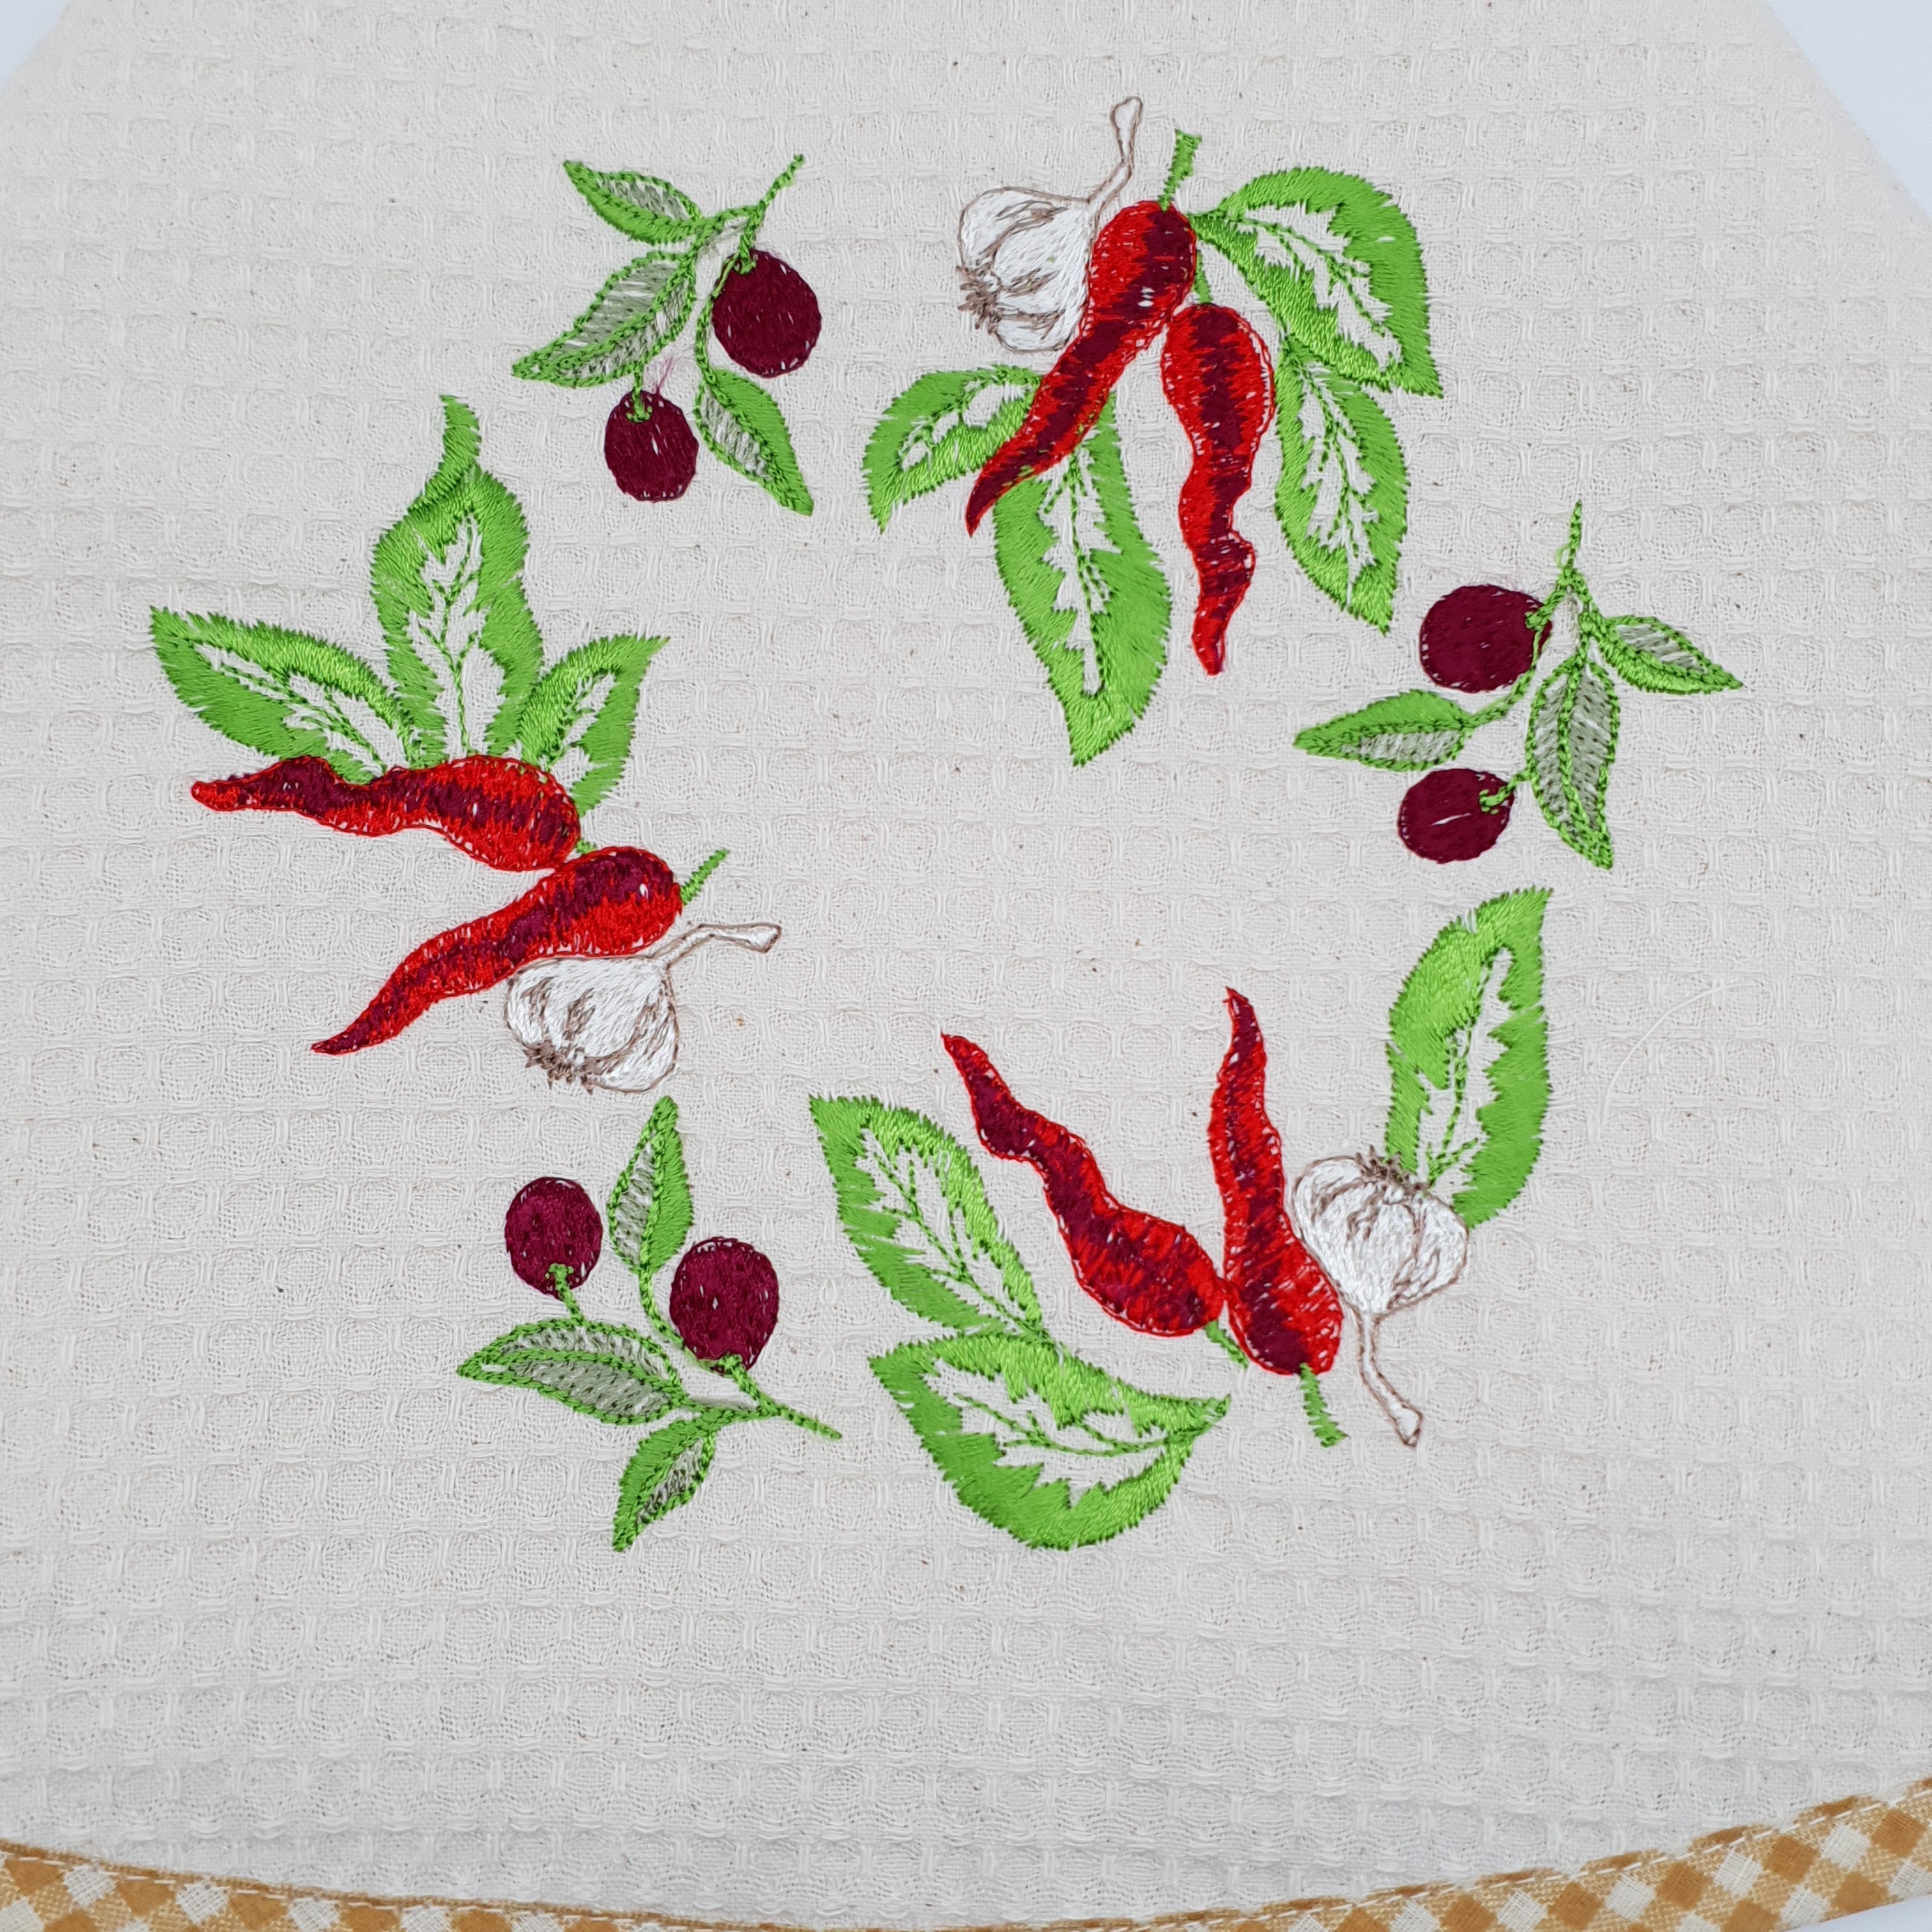 Dishcloth Swivel Beige Chillies and Olives